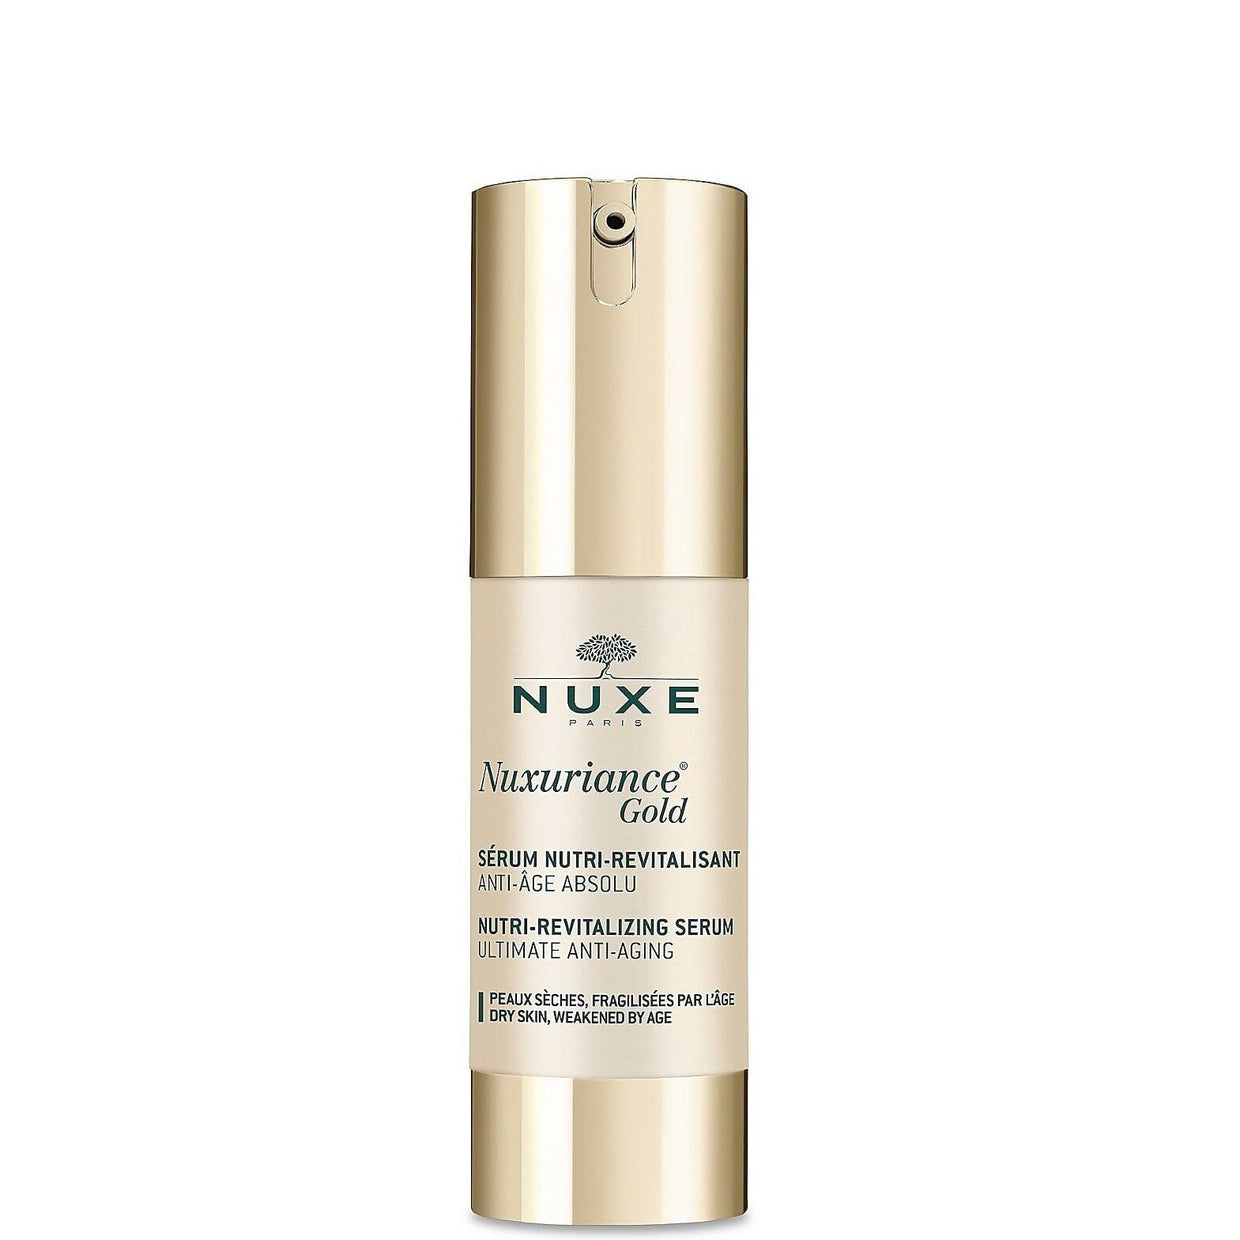 Nuxe Nuxuriance Gold Nutri-Replenishing Serum Nuxe 30 ml Shop at Exclusive Beauty Club